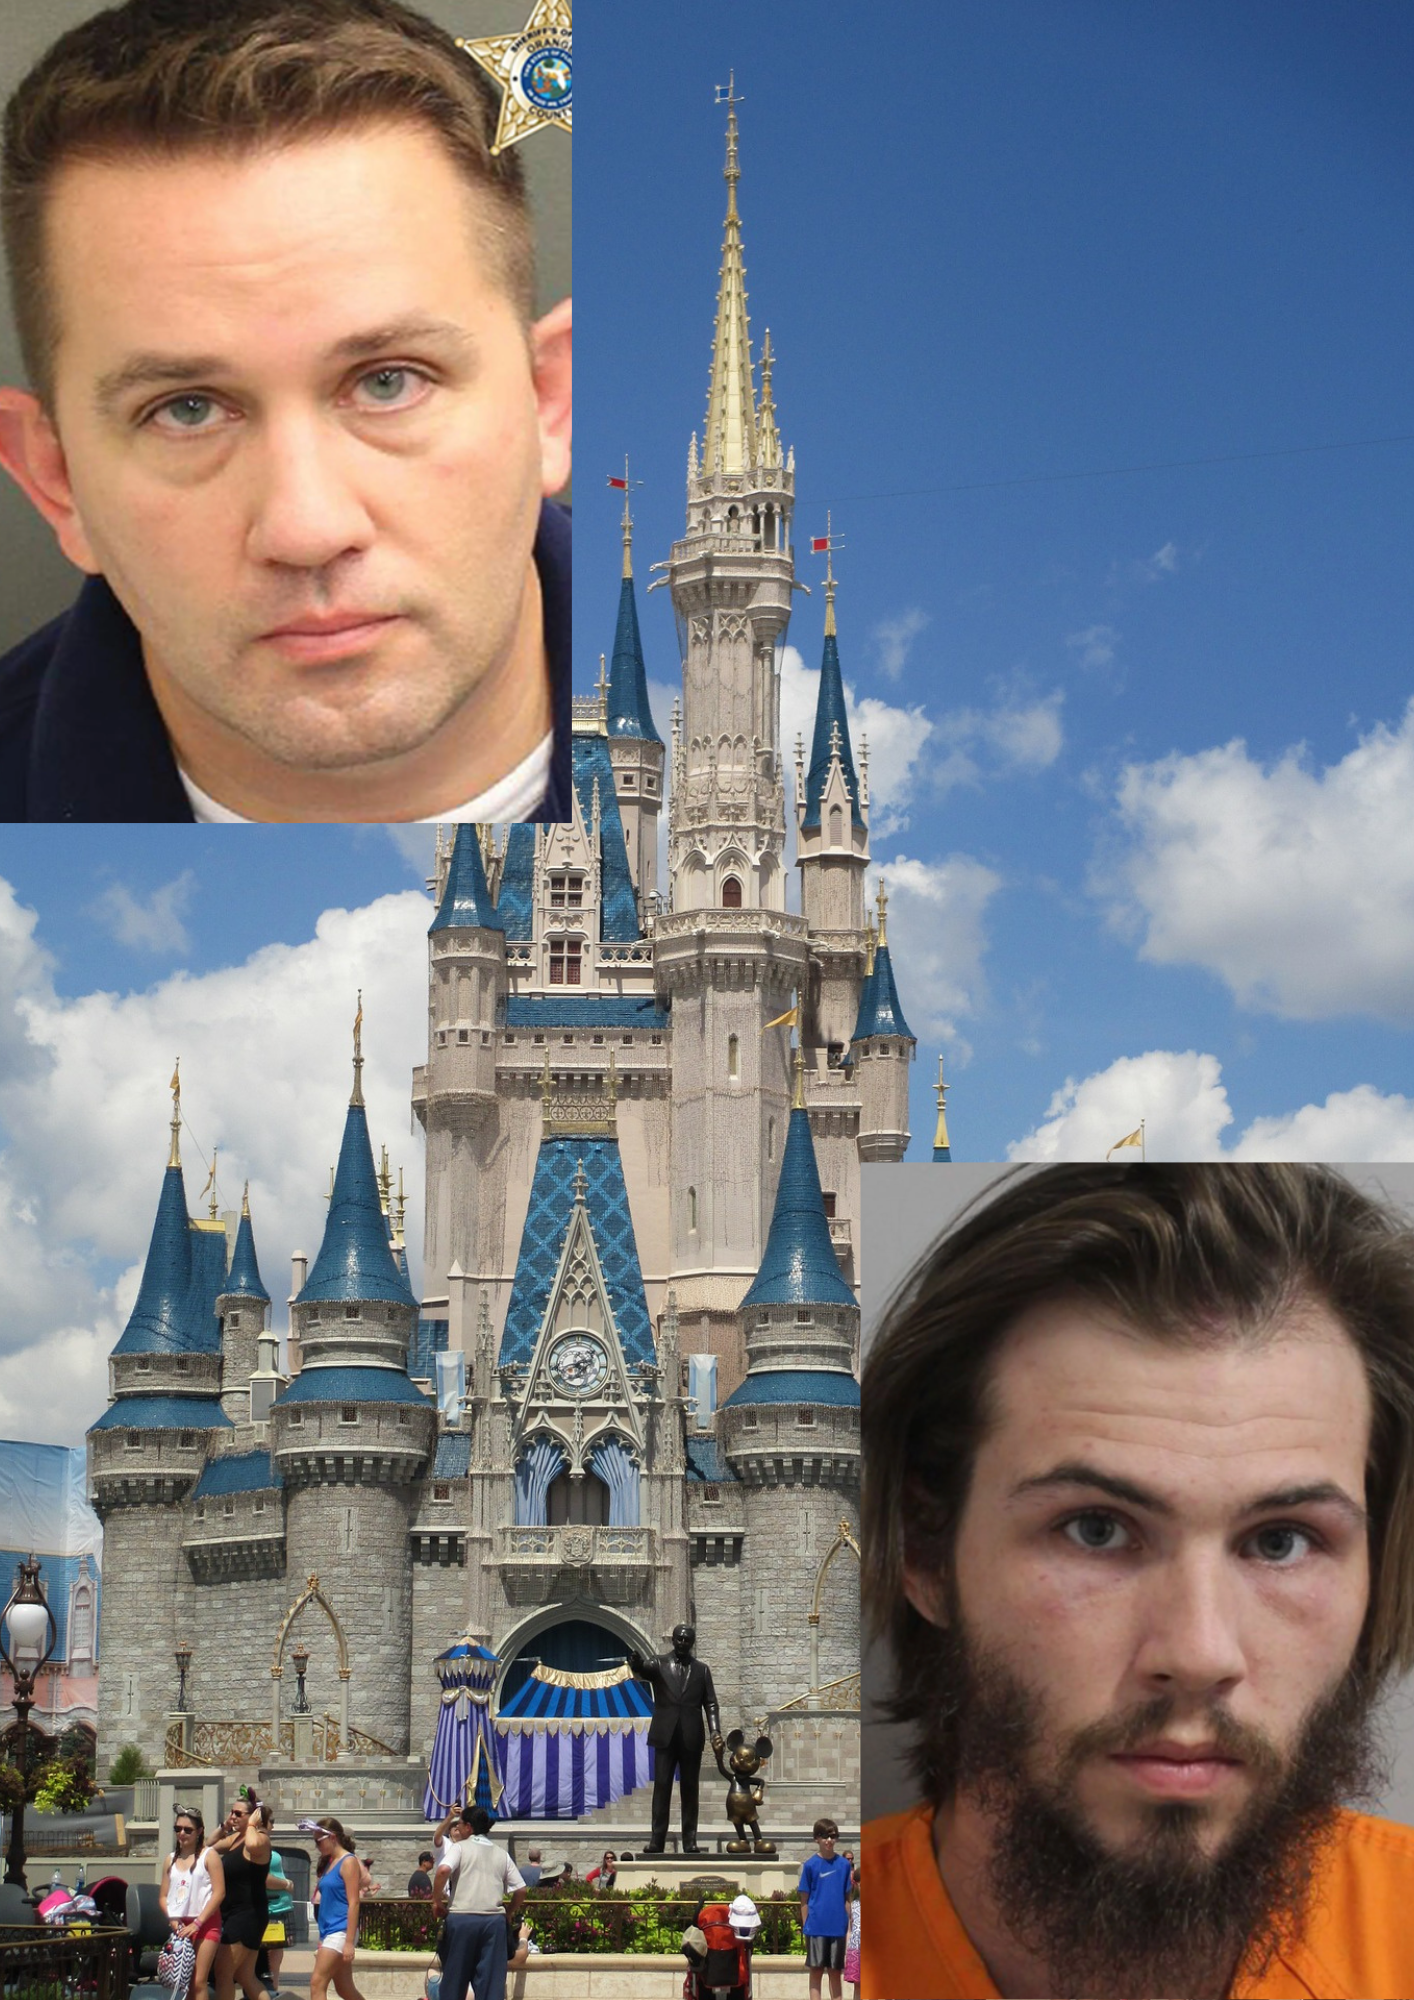 Operation Cyber Guardian II Nabs 2 More Disney Employees During Undercover Sexual Predator Sting 2